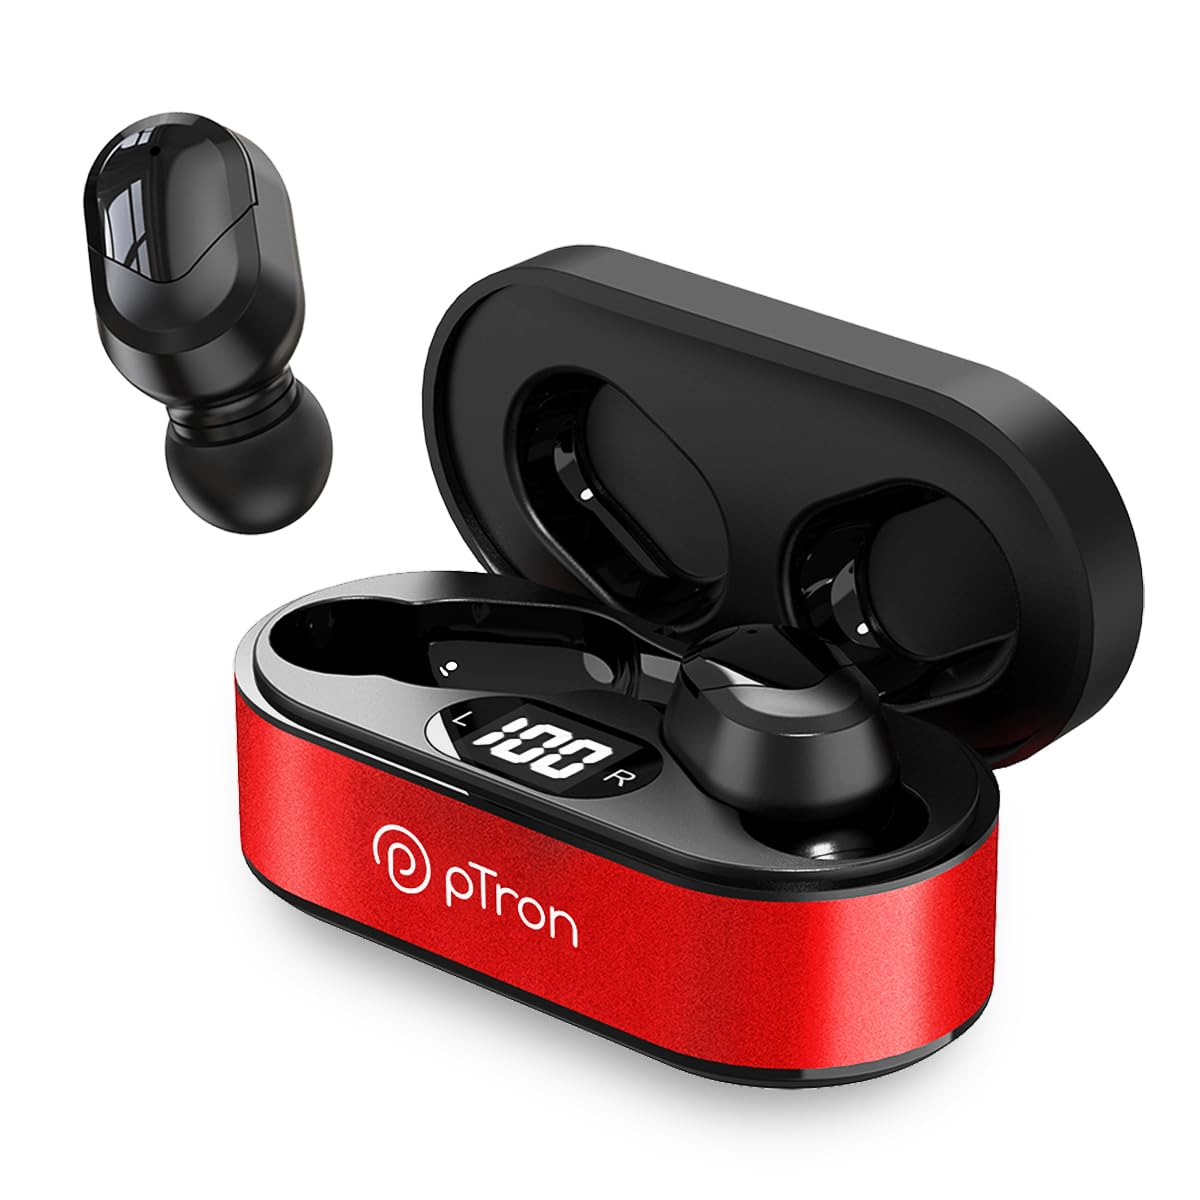 pTron Bassbuds Plus in-Ear TWS Earbuds with HD Mics, Bluetooth 5.0 Headphones with Immersive Sound, Stereo Calls, 28Hrs Playtime, Voice Assist Ready, IPX4 Water Resistant & Fast Charge (Raging Red)